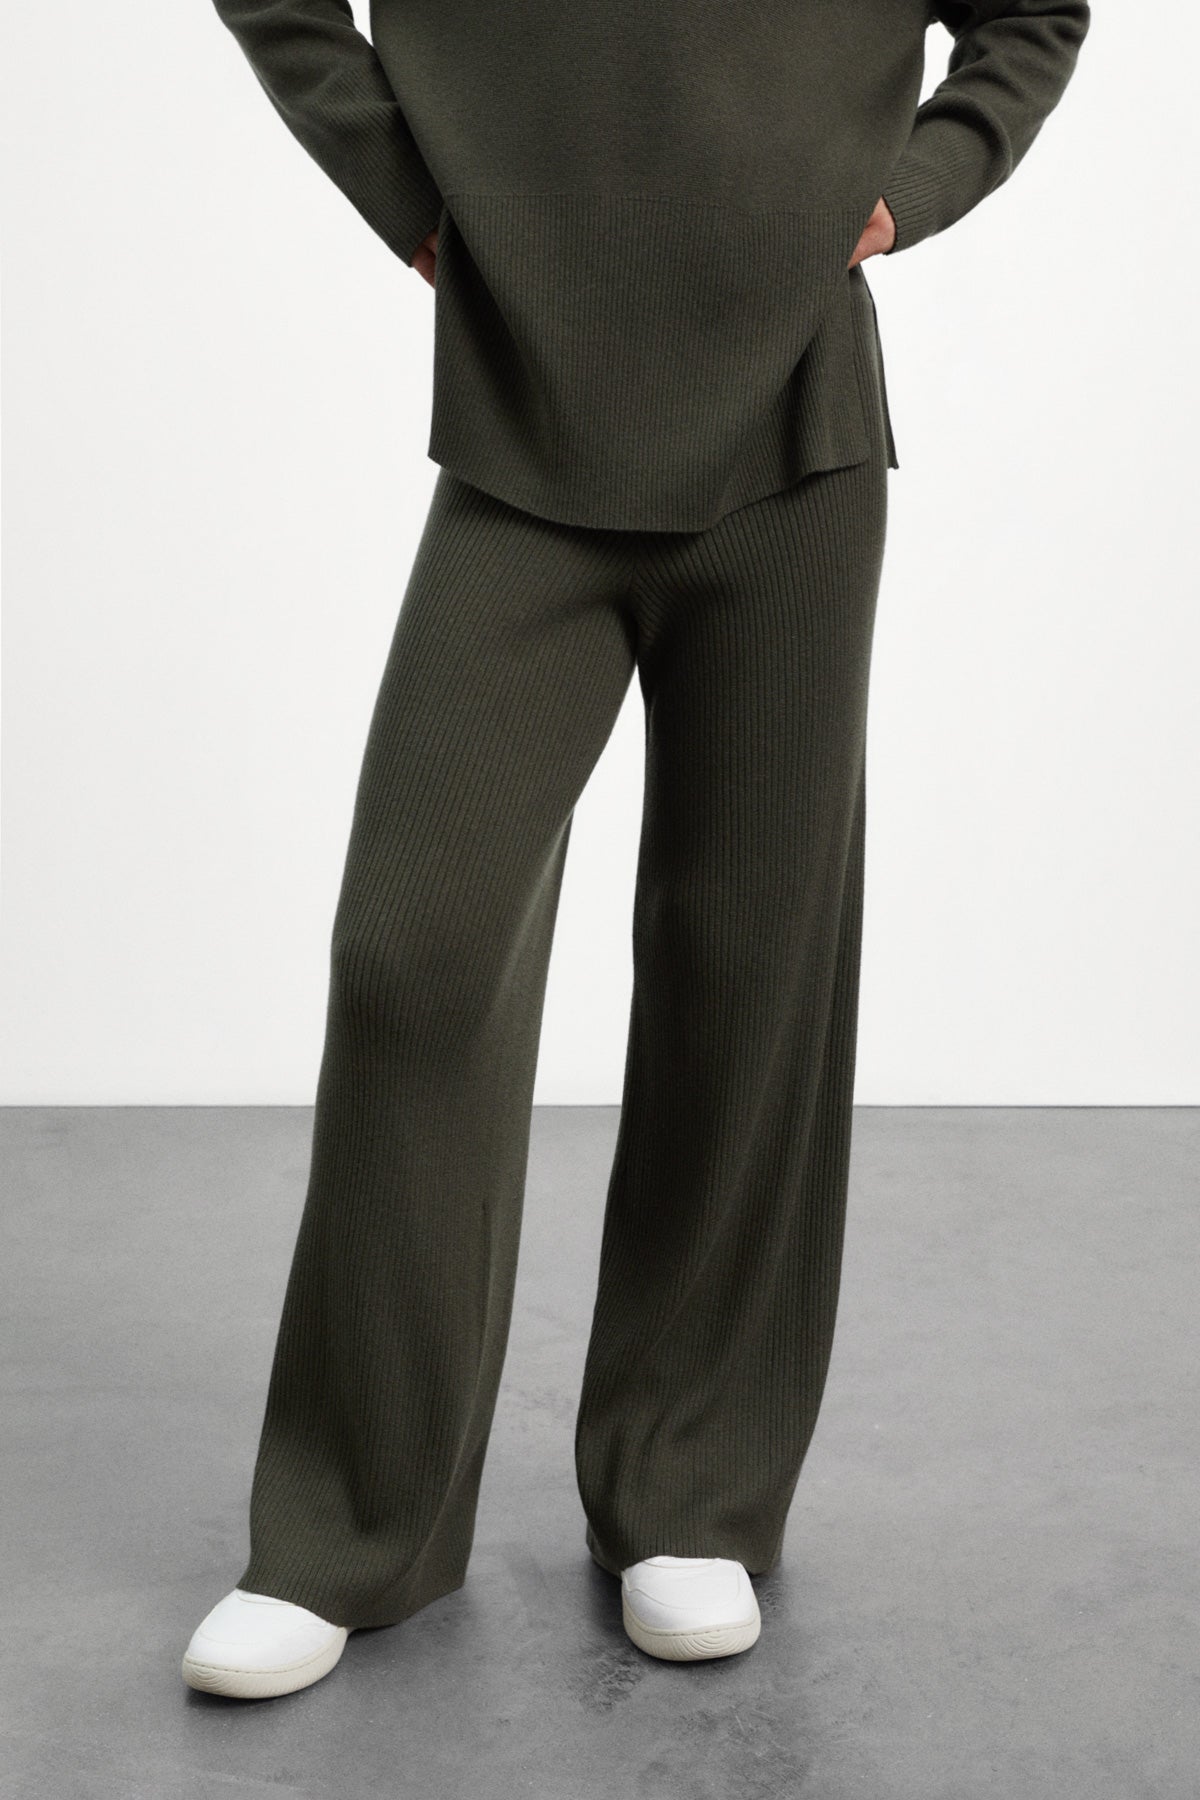 Women's wool trousers | ECOALF Trouser collection